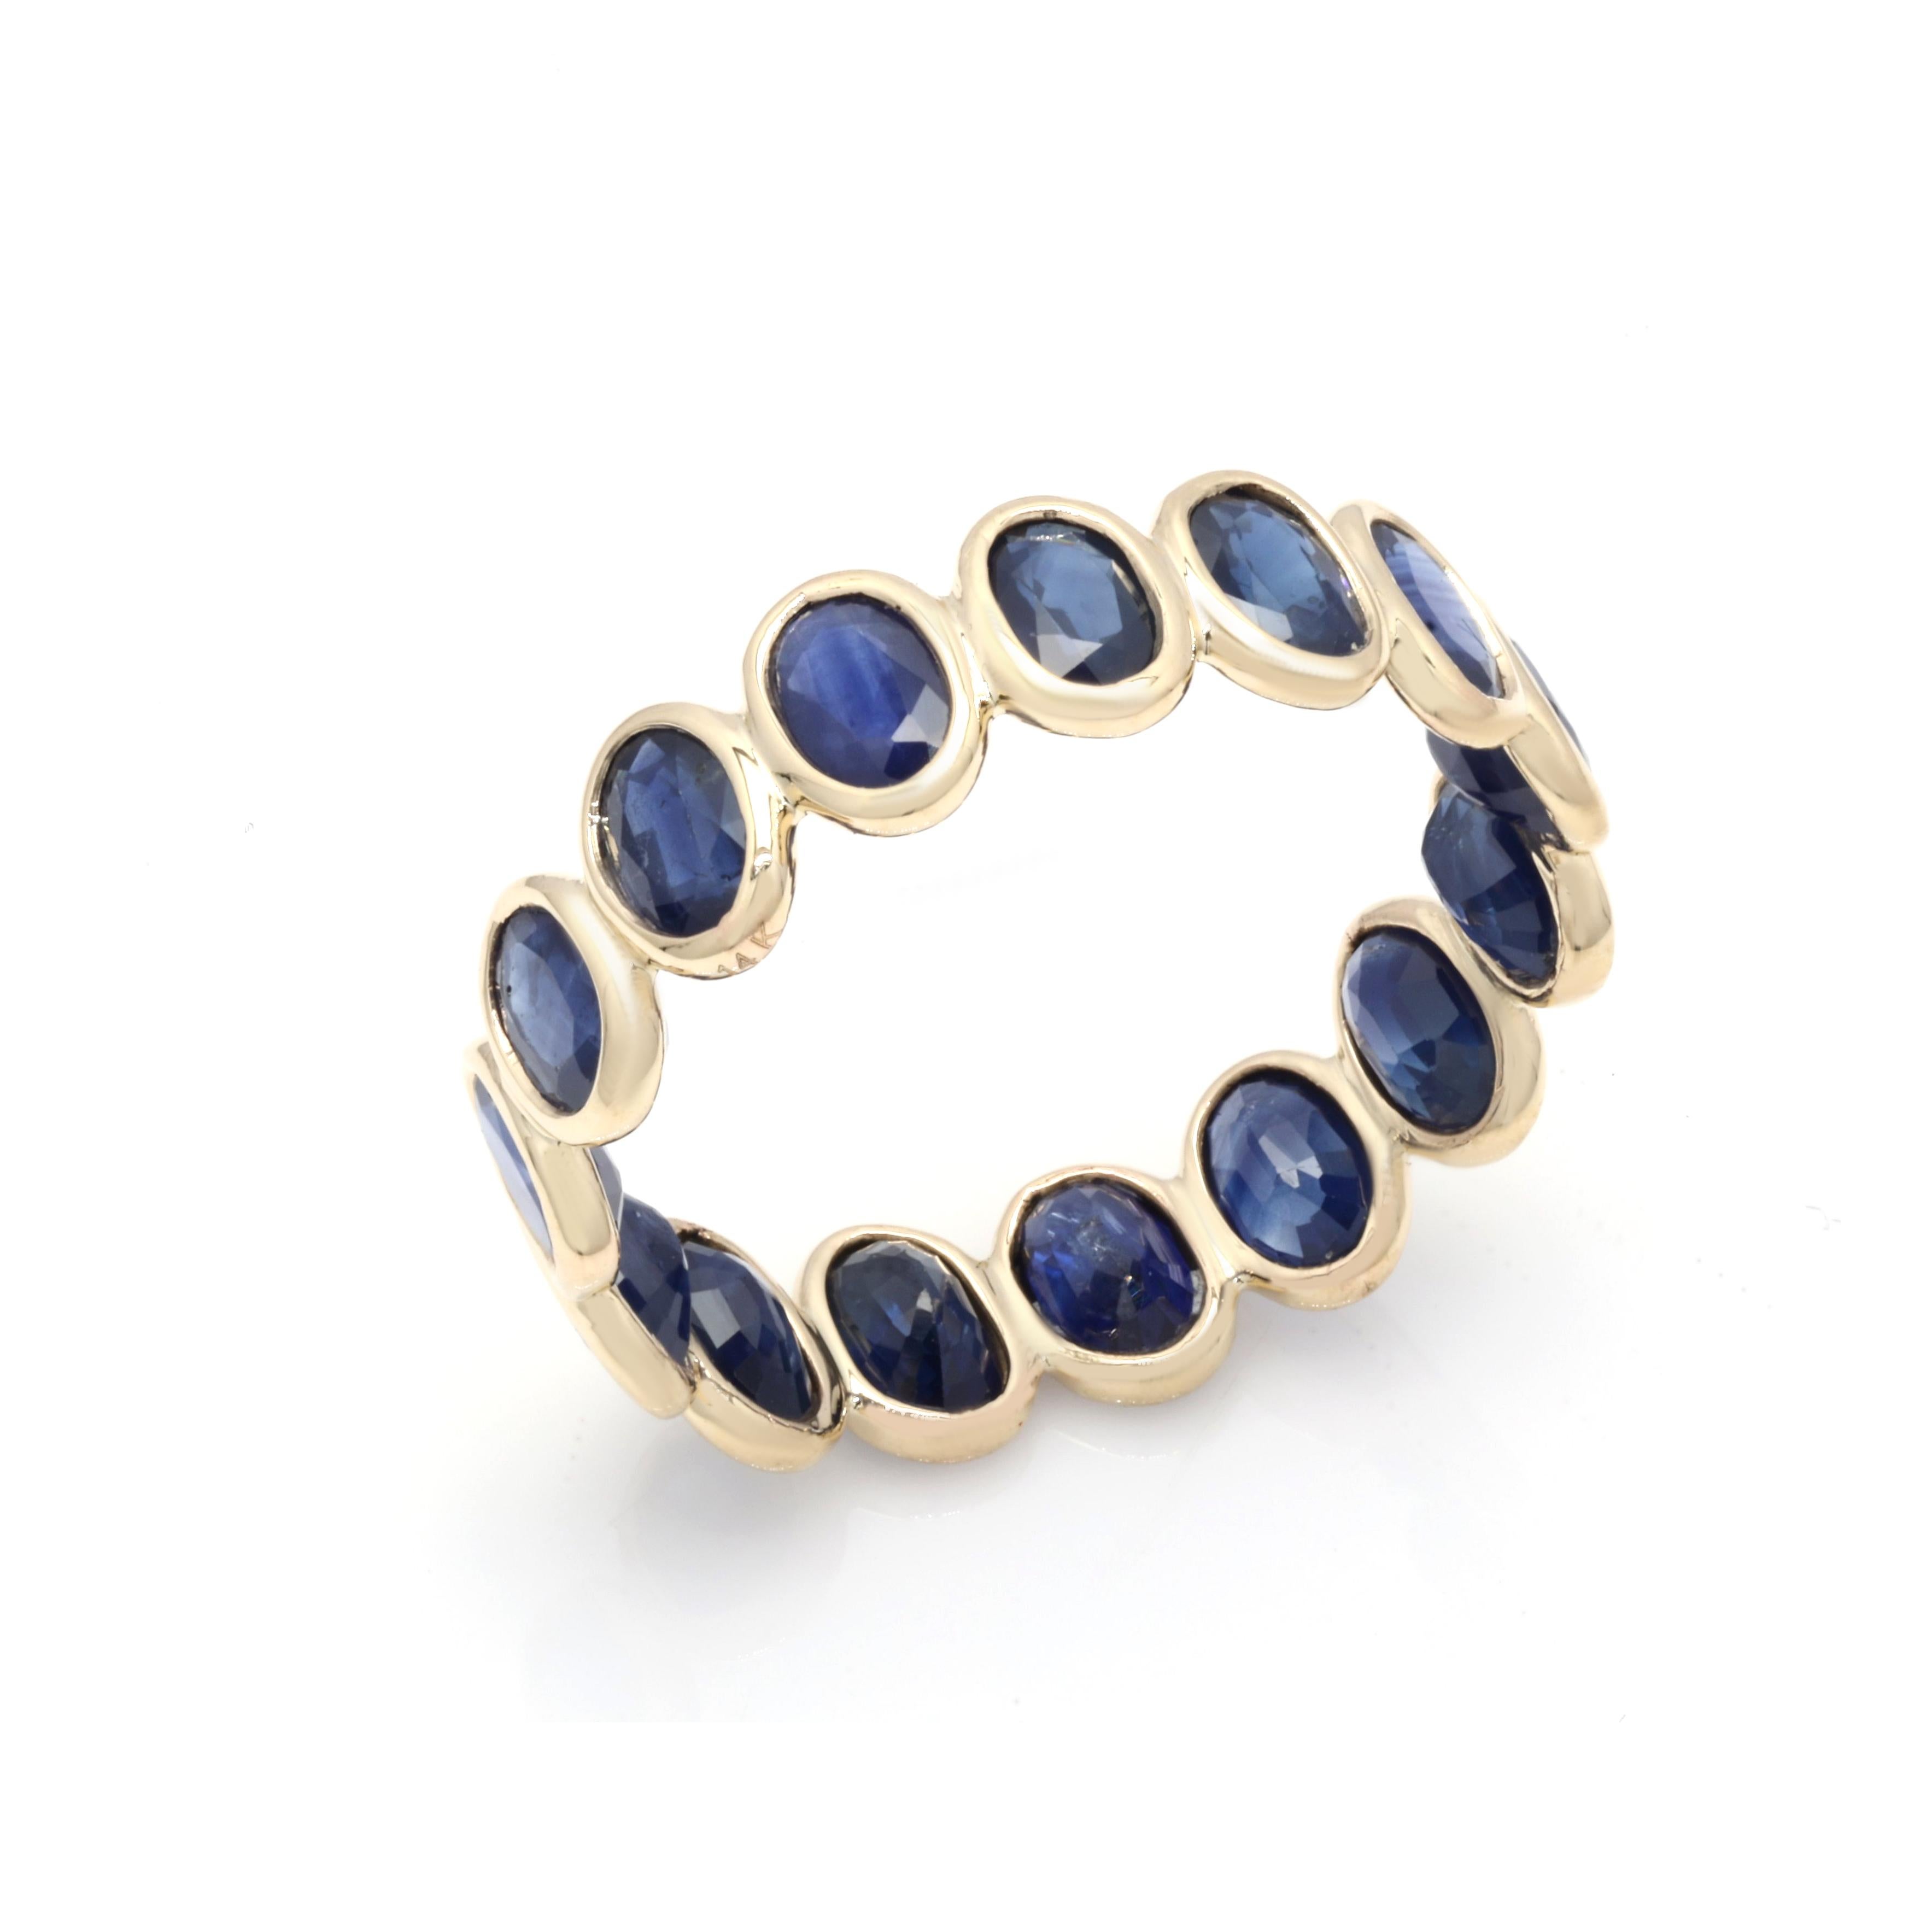 For Sale:  14K Yellow Gold 5 Carat Oval Cut Sapphire Eternity Band Ring 4